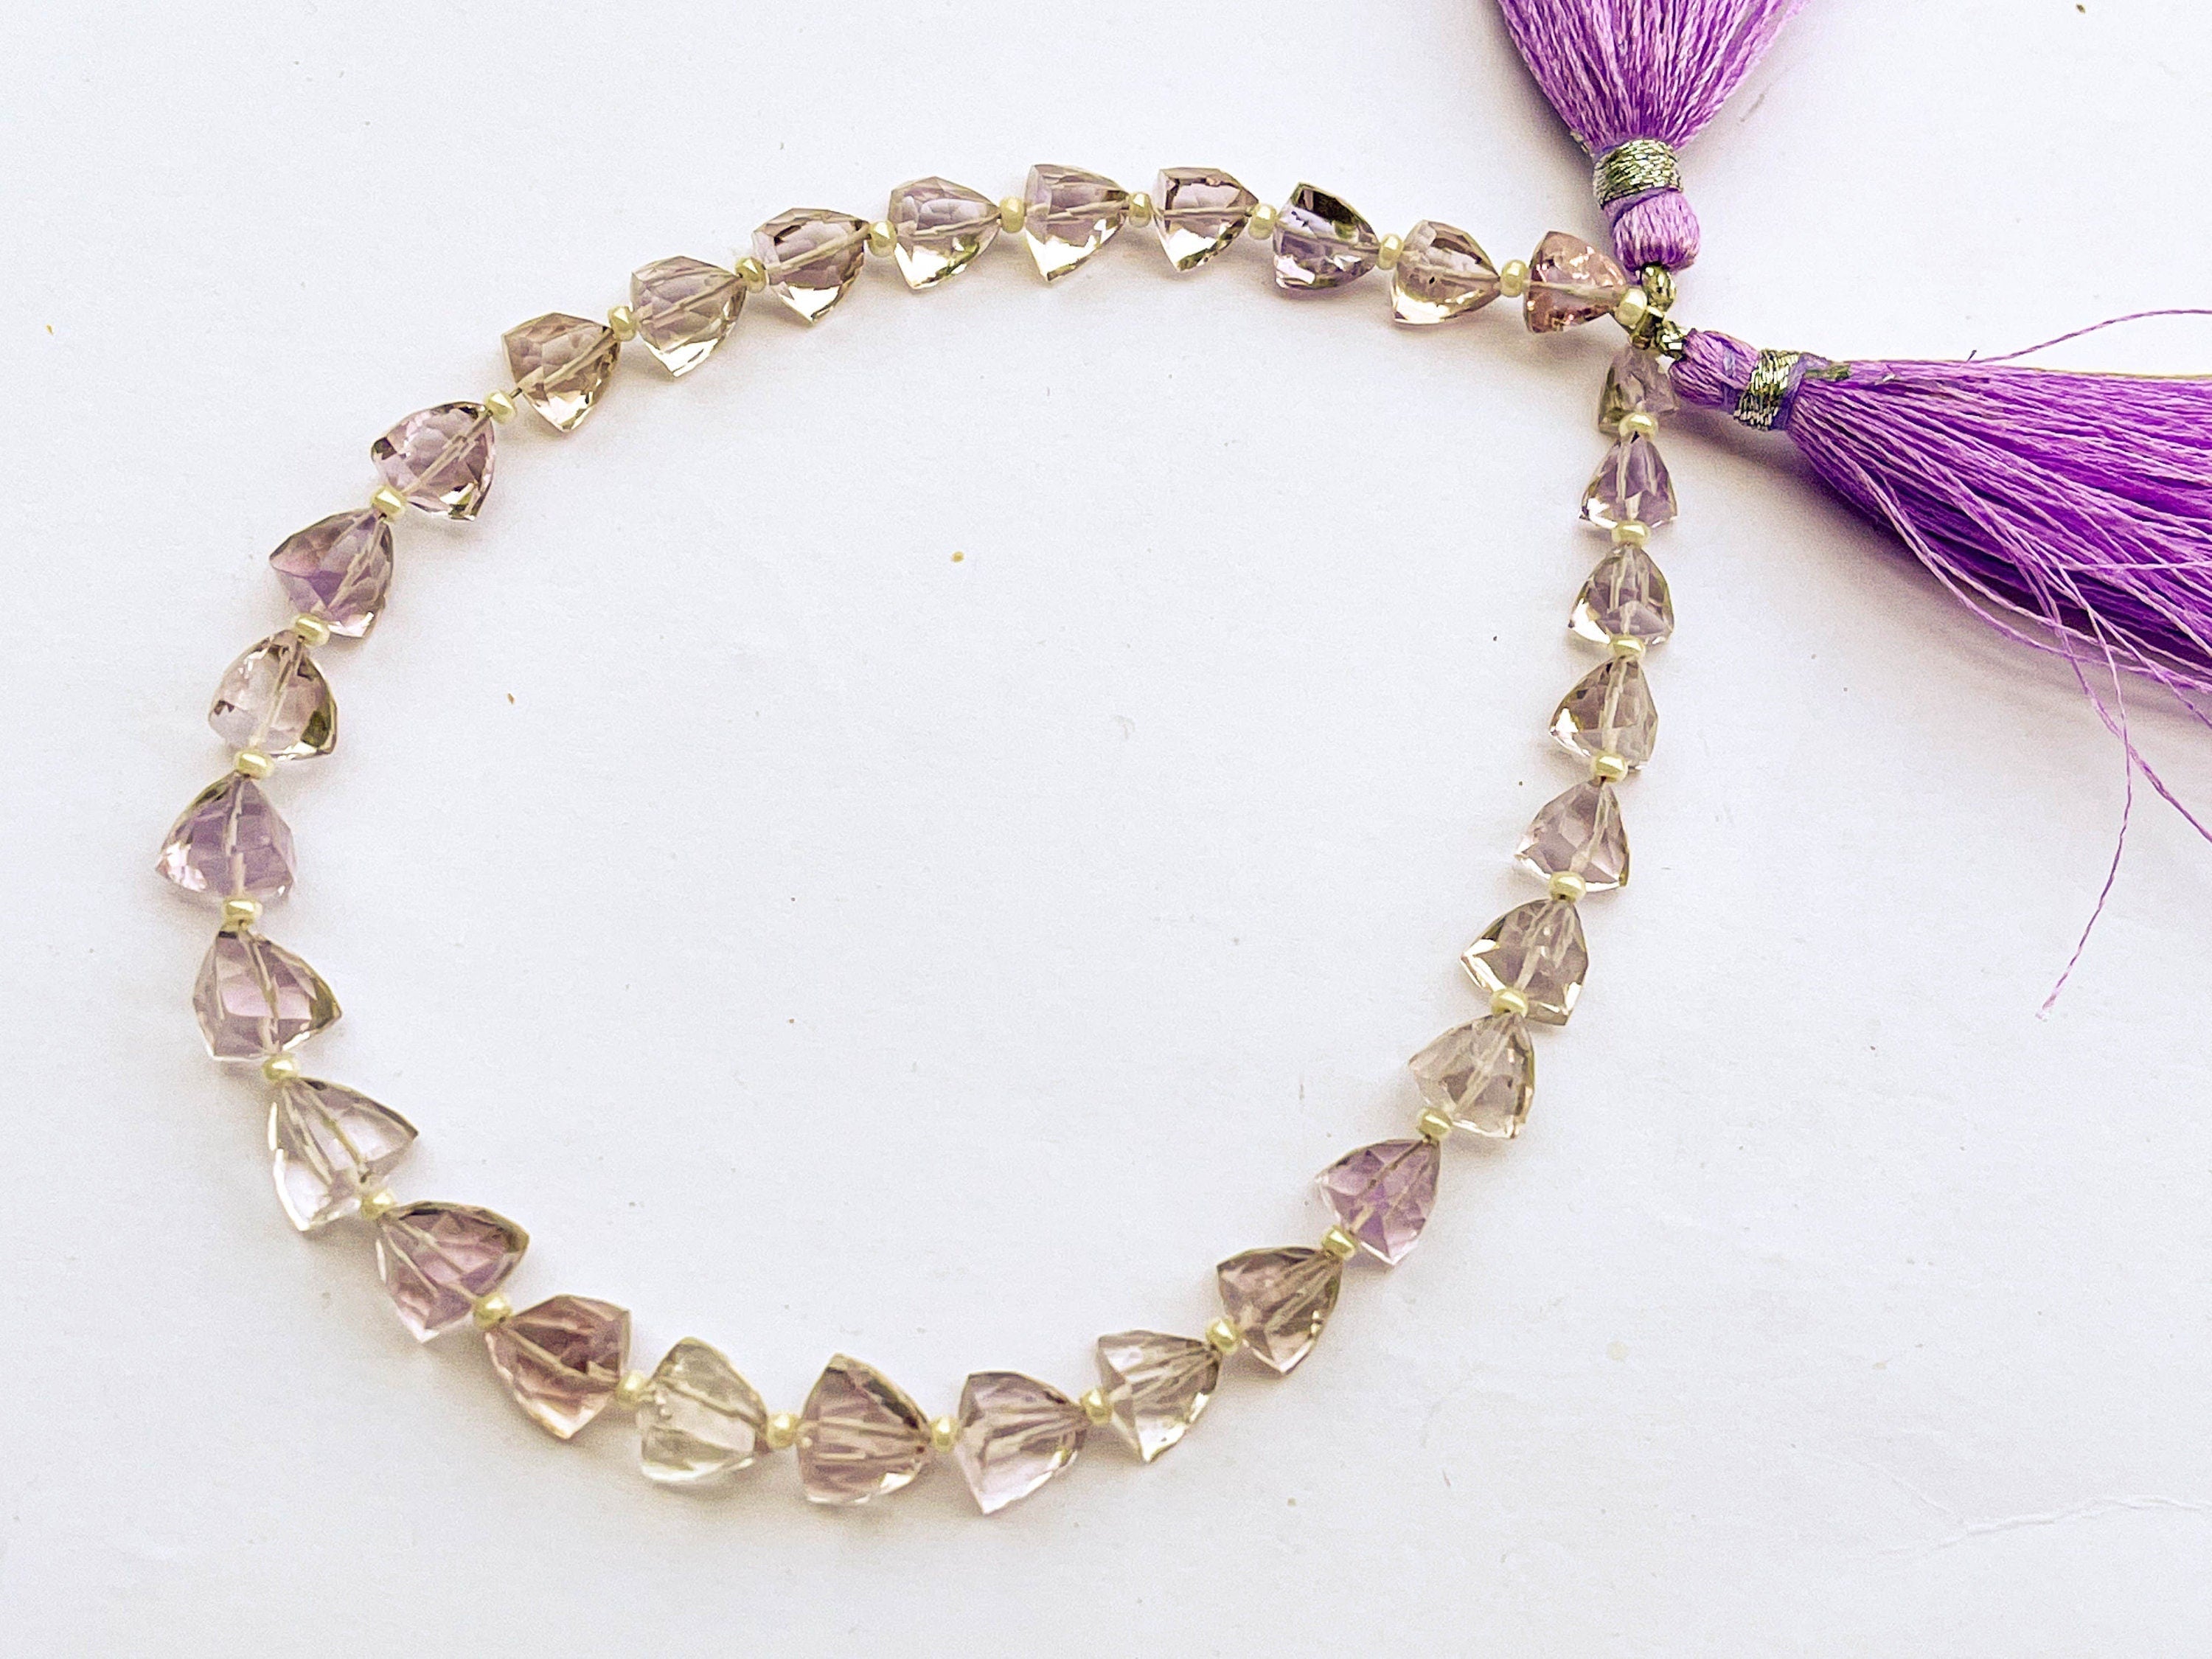 30 pieces PINK AMETHYST 3D Trillion Shape Beads, Natural Amethyst Trillion Shape Beads, Amethyst Pyramid, Amethyst Beads, 5mm to 7mm Beadsforyourjewelry